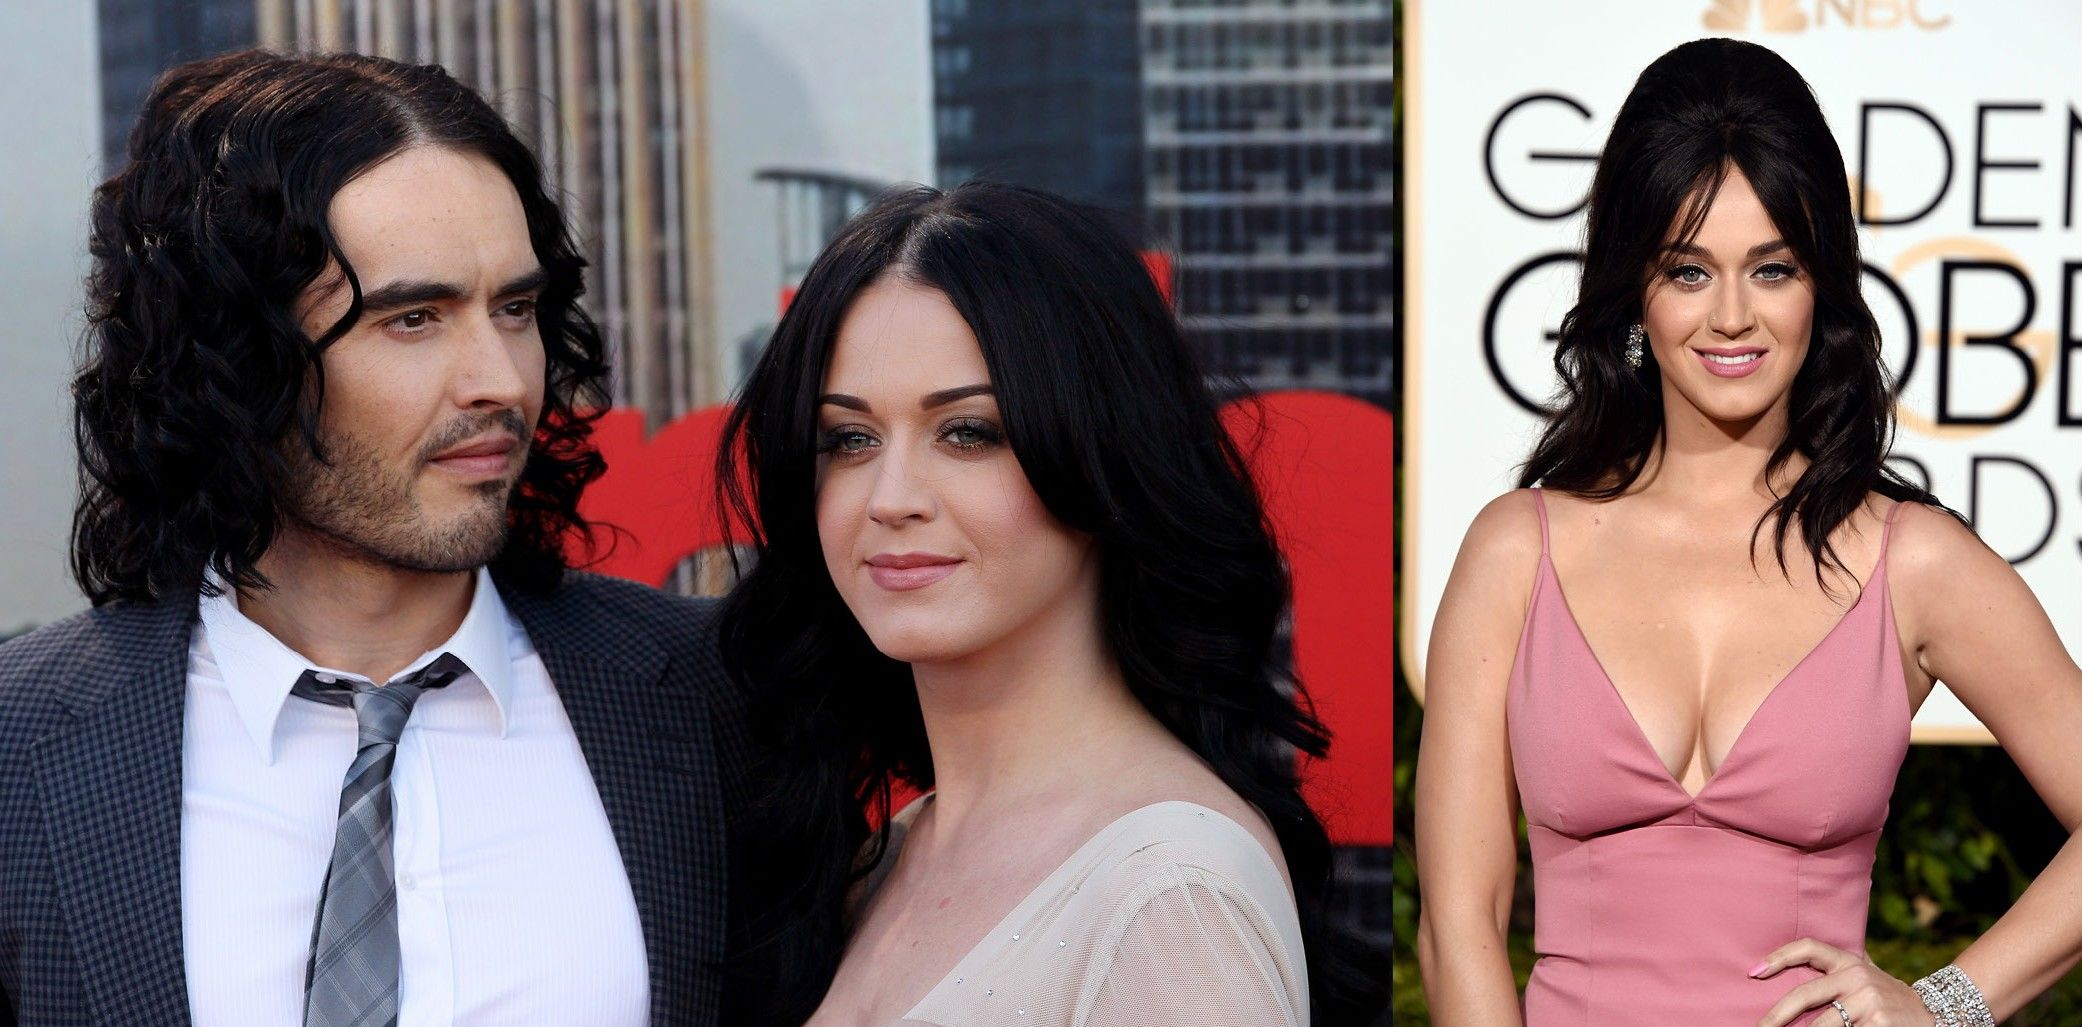 Katy Perry e Russell Brand